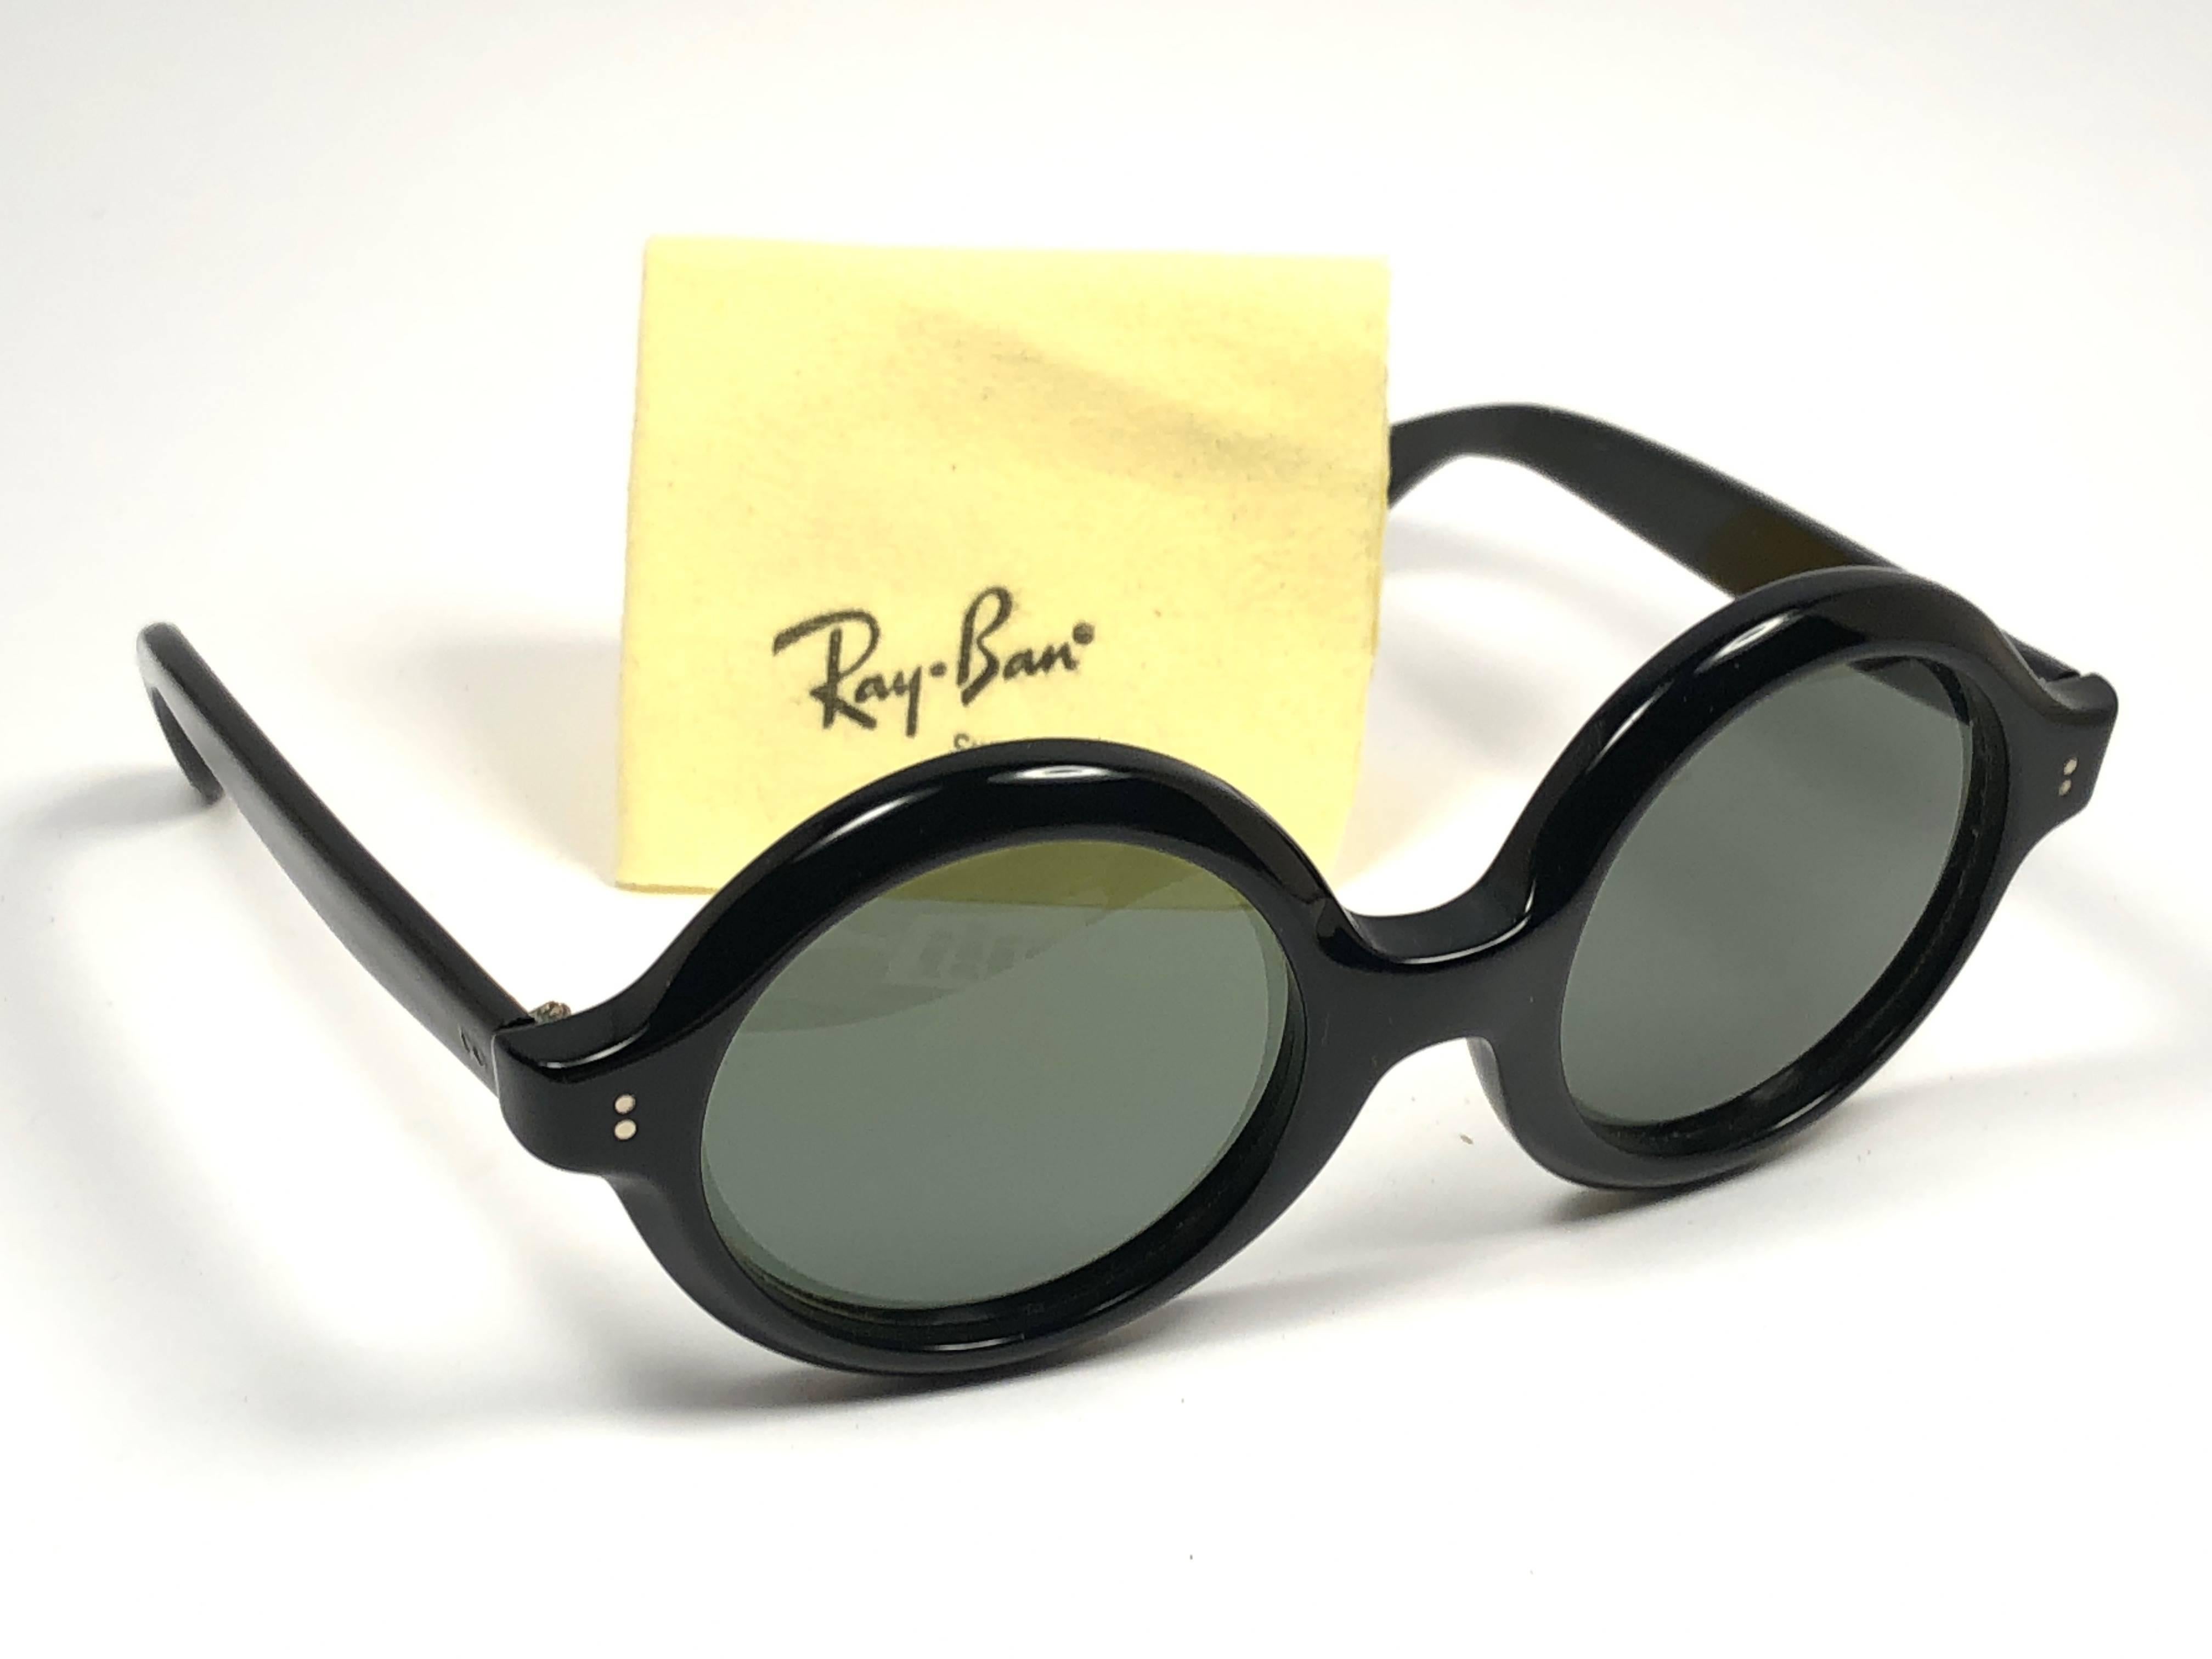 New, Collectors item, 1960's vintage Ray Ban Pasha sleek black with G15 grey lenses. B & L Ray Ban usa etched in one temple, Pasha in the other temple. no B&L etching yet. please look at the pictures. Shows small wear due to storage. Designed and